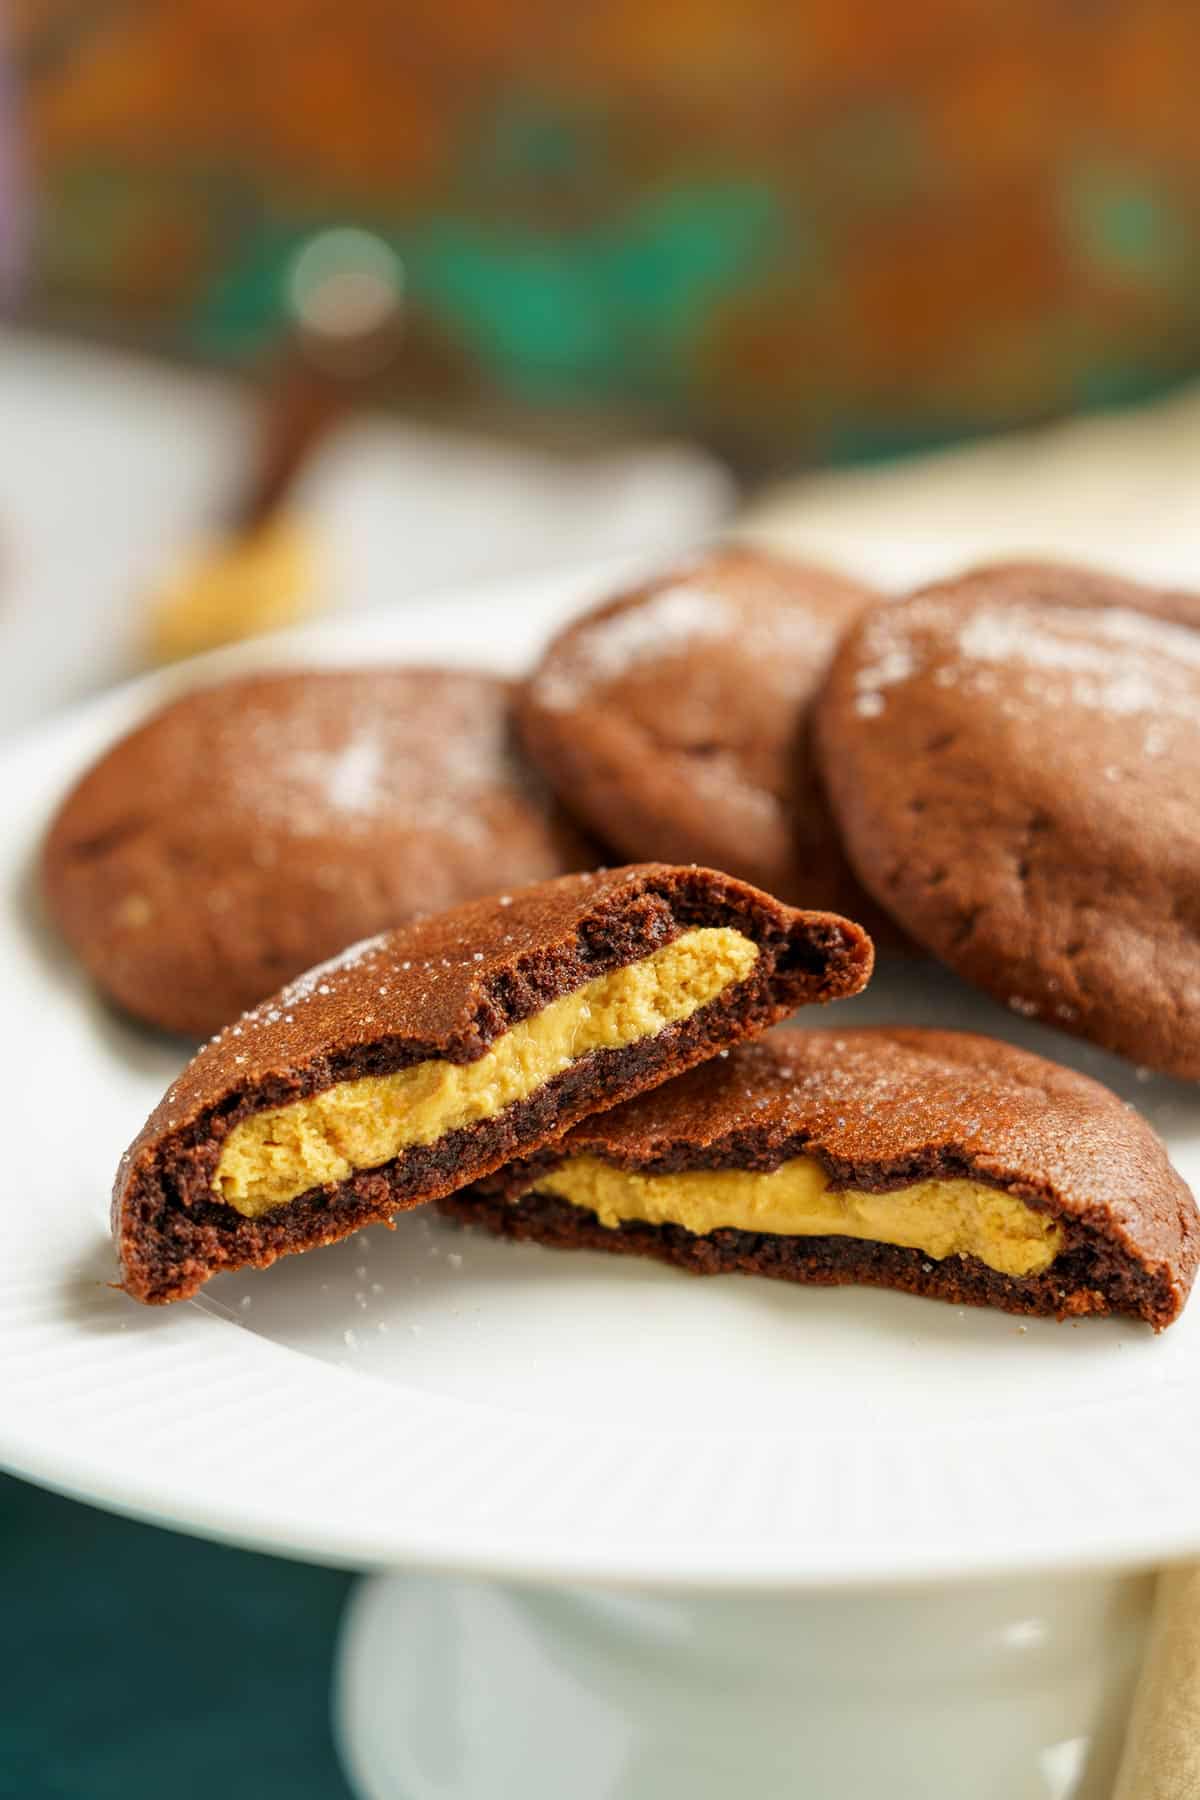 Full feature image of a split peanut butter stuffed chocolate cookie on a white plate.